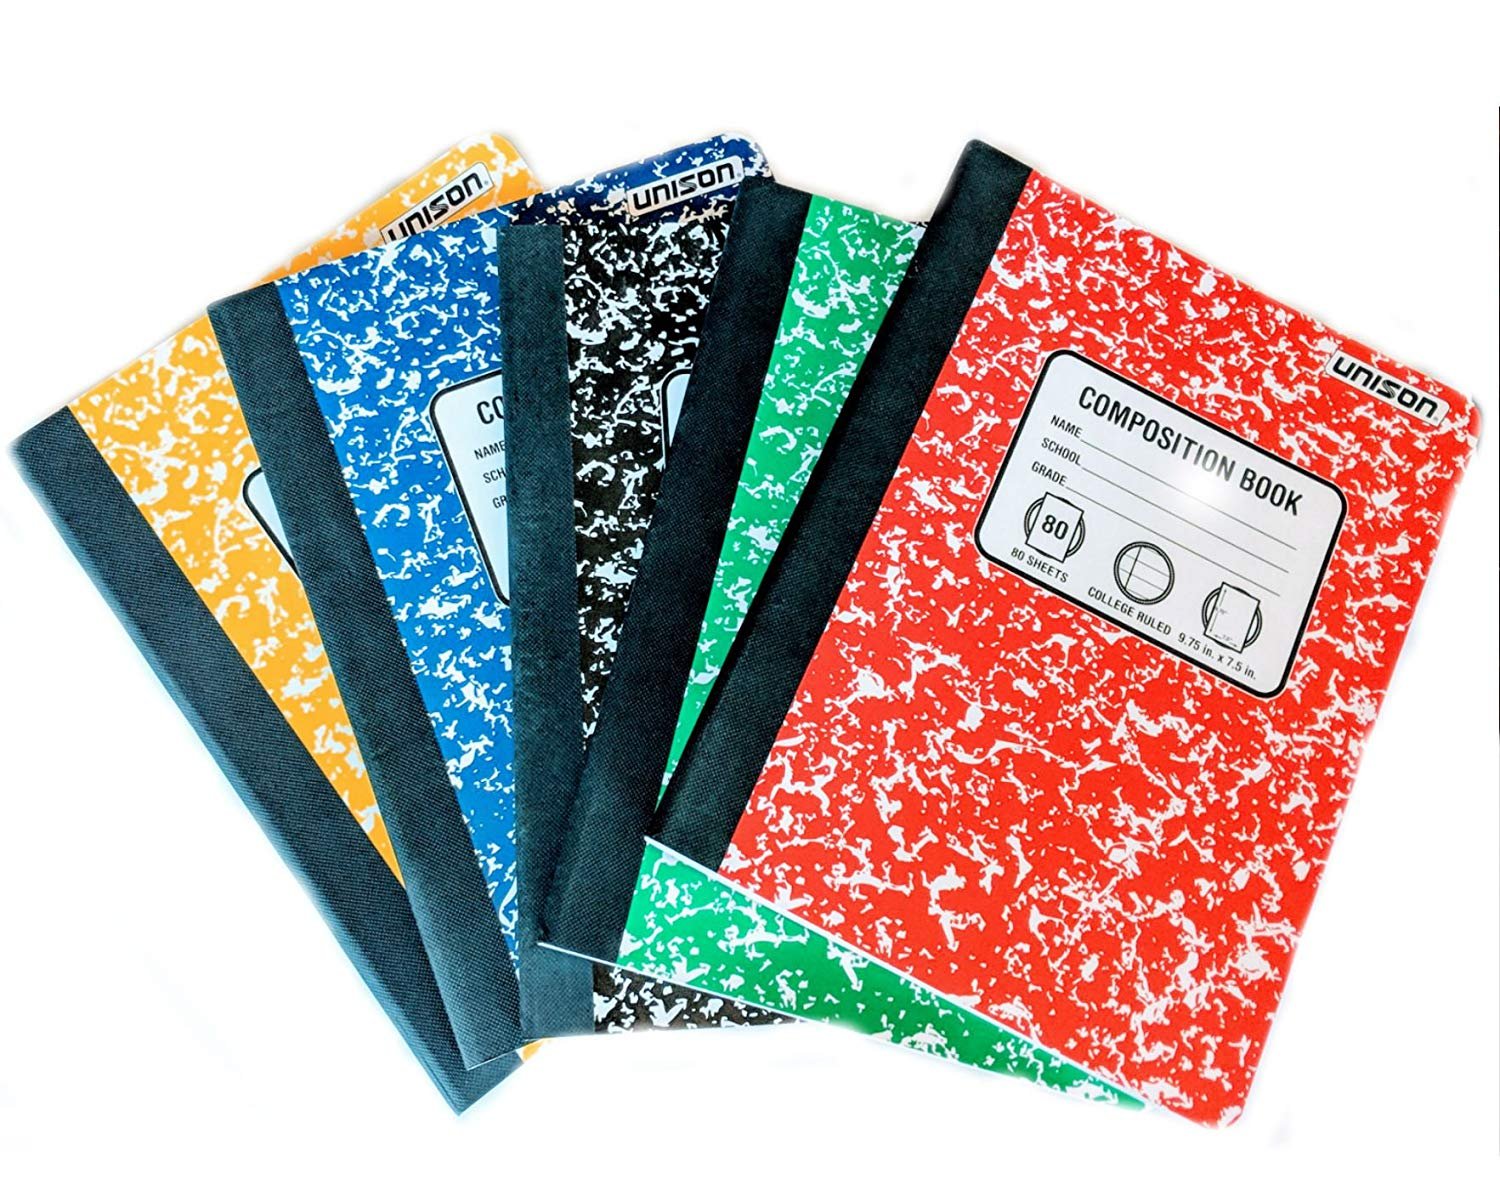 Mini Composition Book, Note Pad, 3 Pack in 3 Different Color Red, Green & Blue